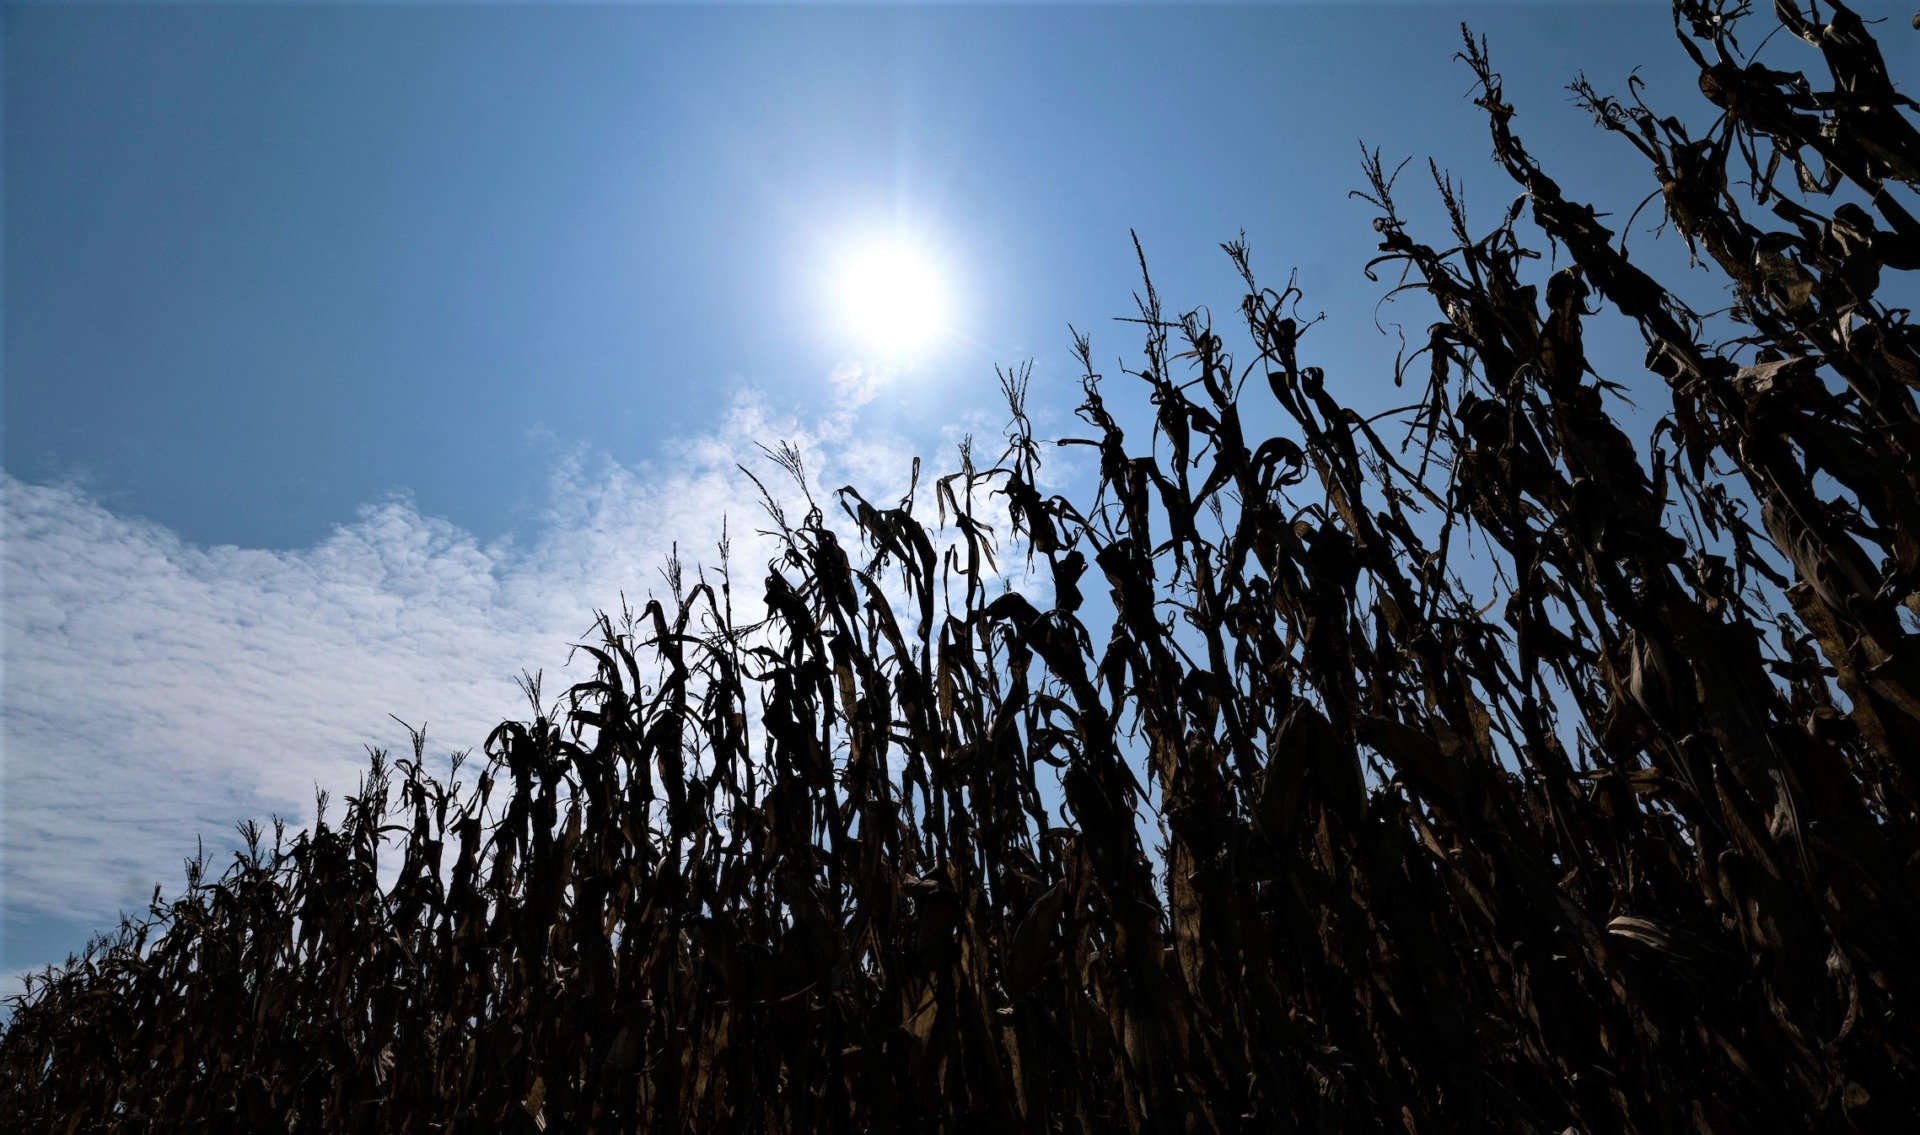 High temperatures take toll on Texas crops